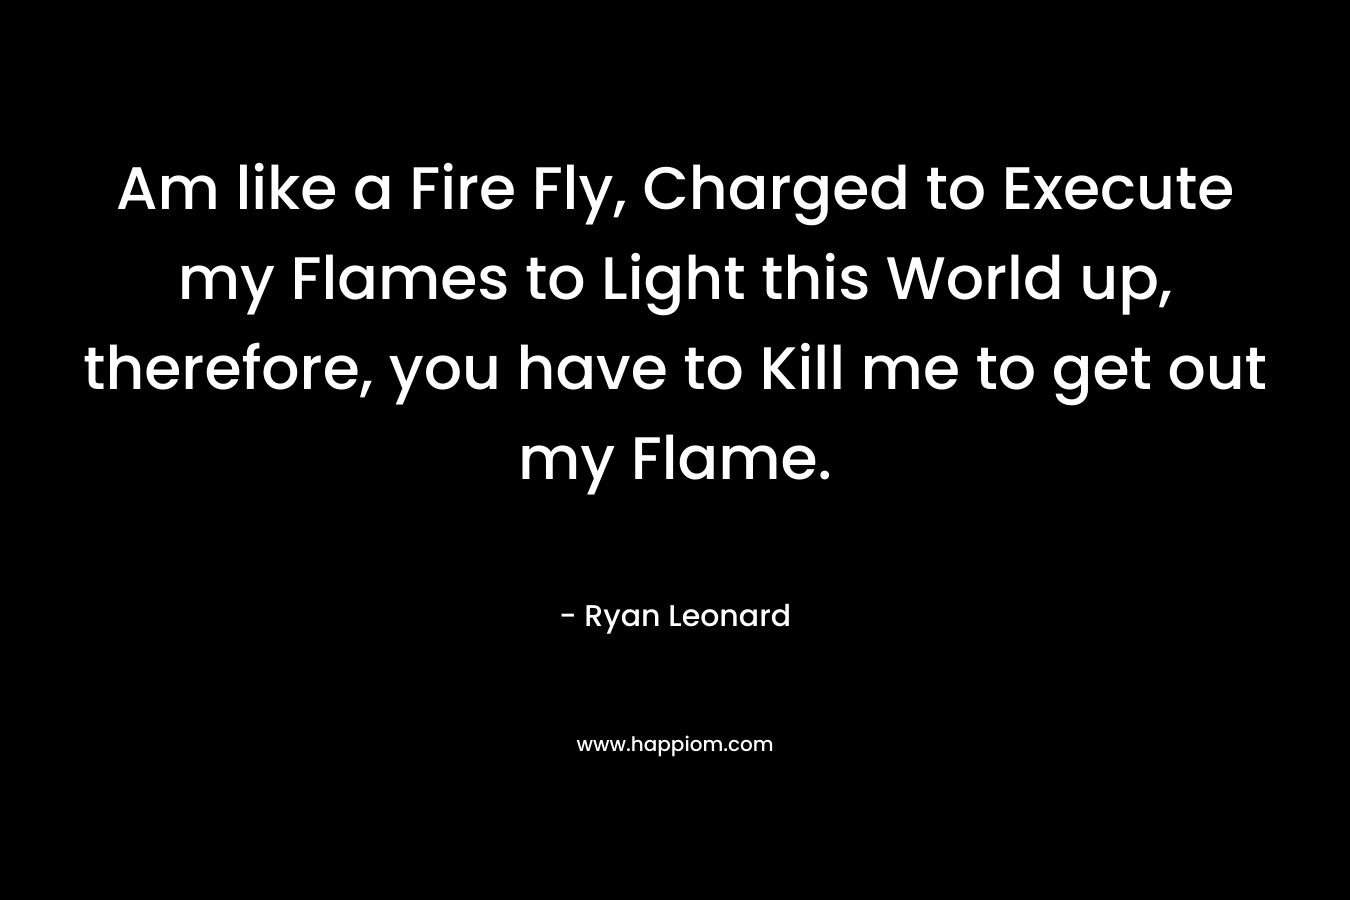 Am like a Fire Fly, Charged to Execute my Flames to Light this World up, therefore, you have to Kill me to get out my Flame. – Ryan Leonard